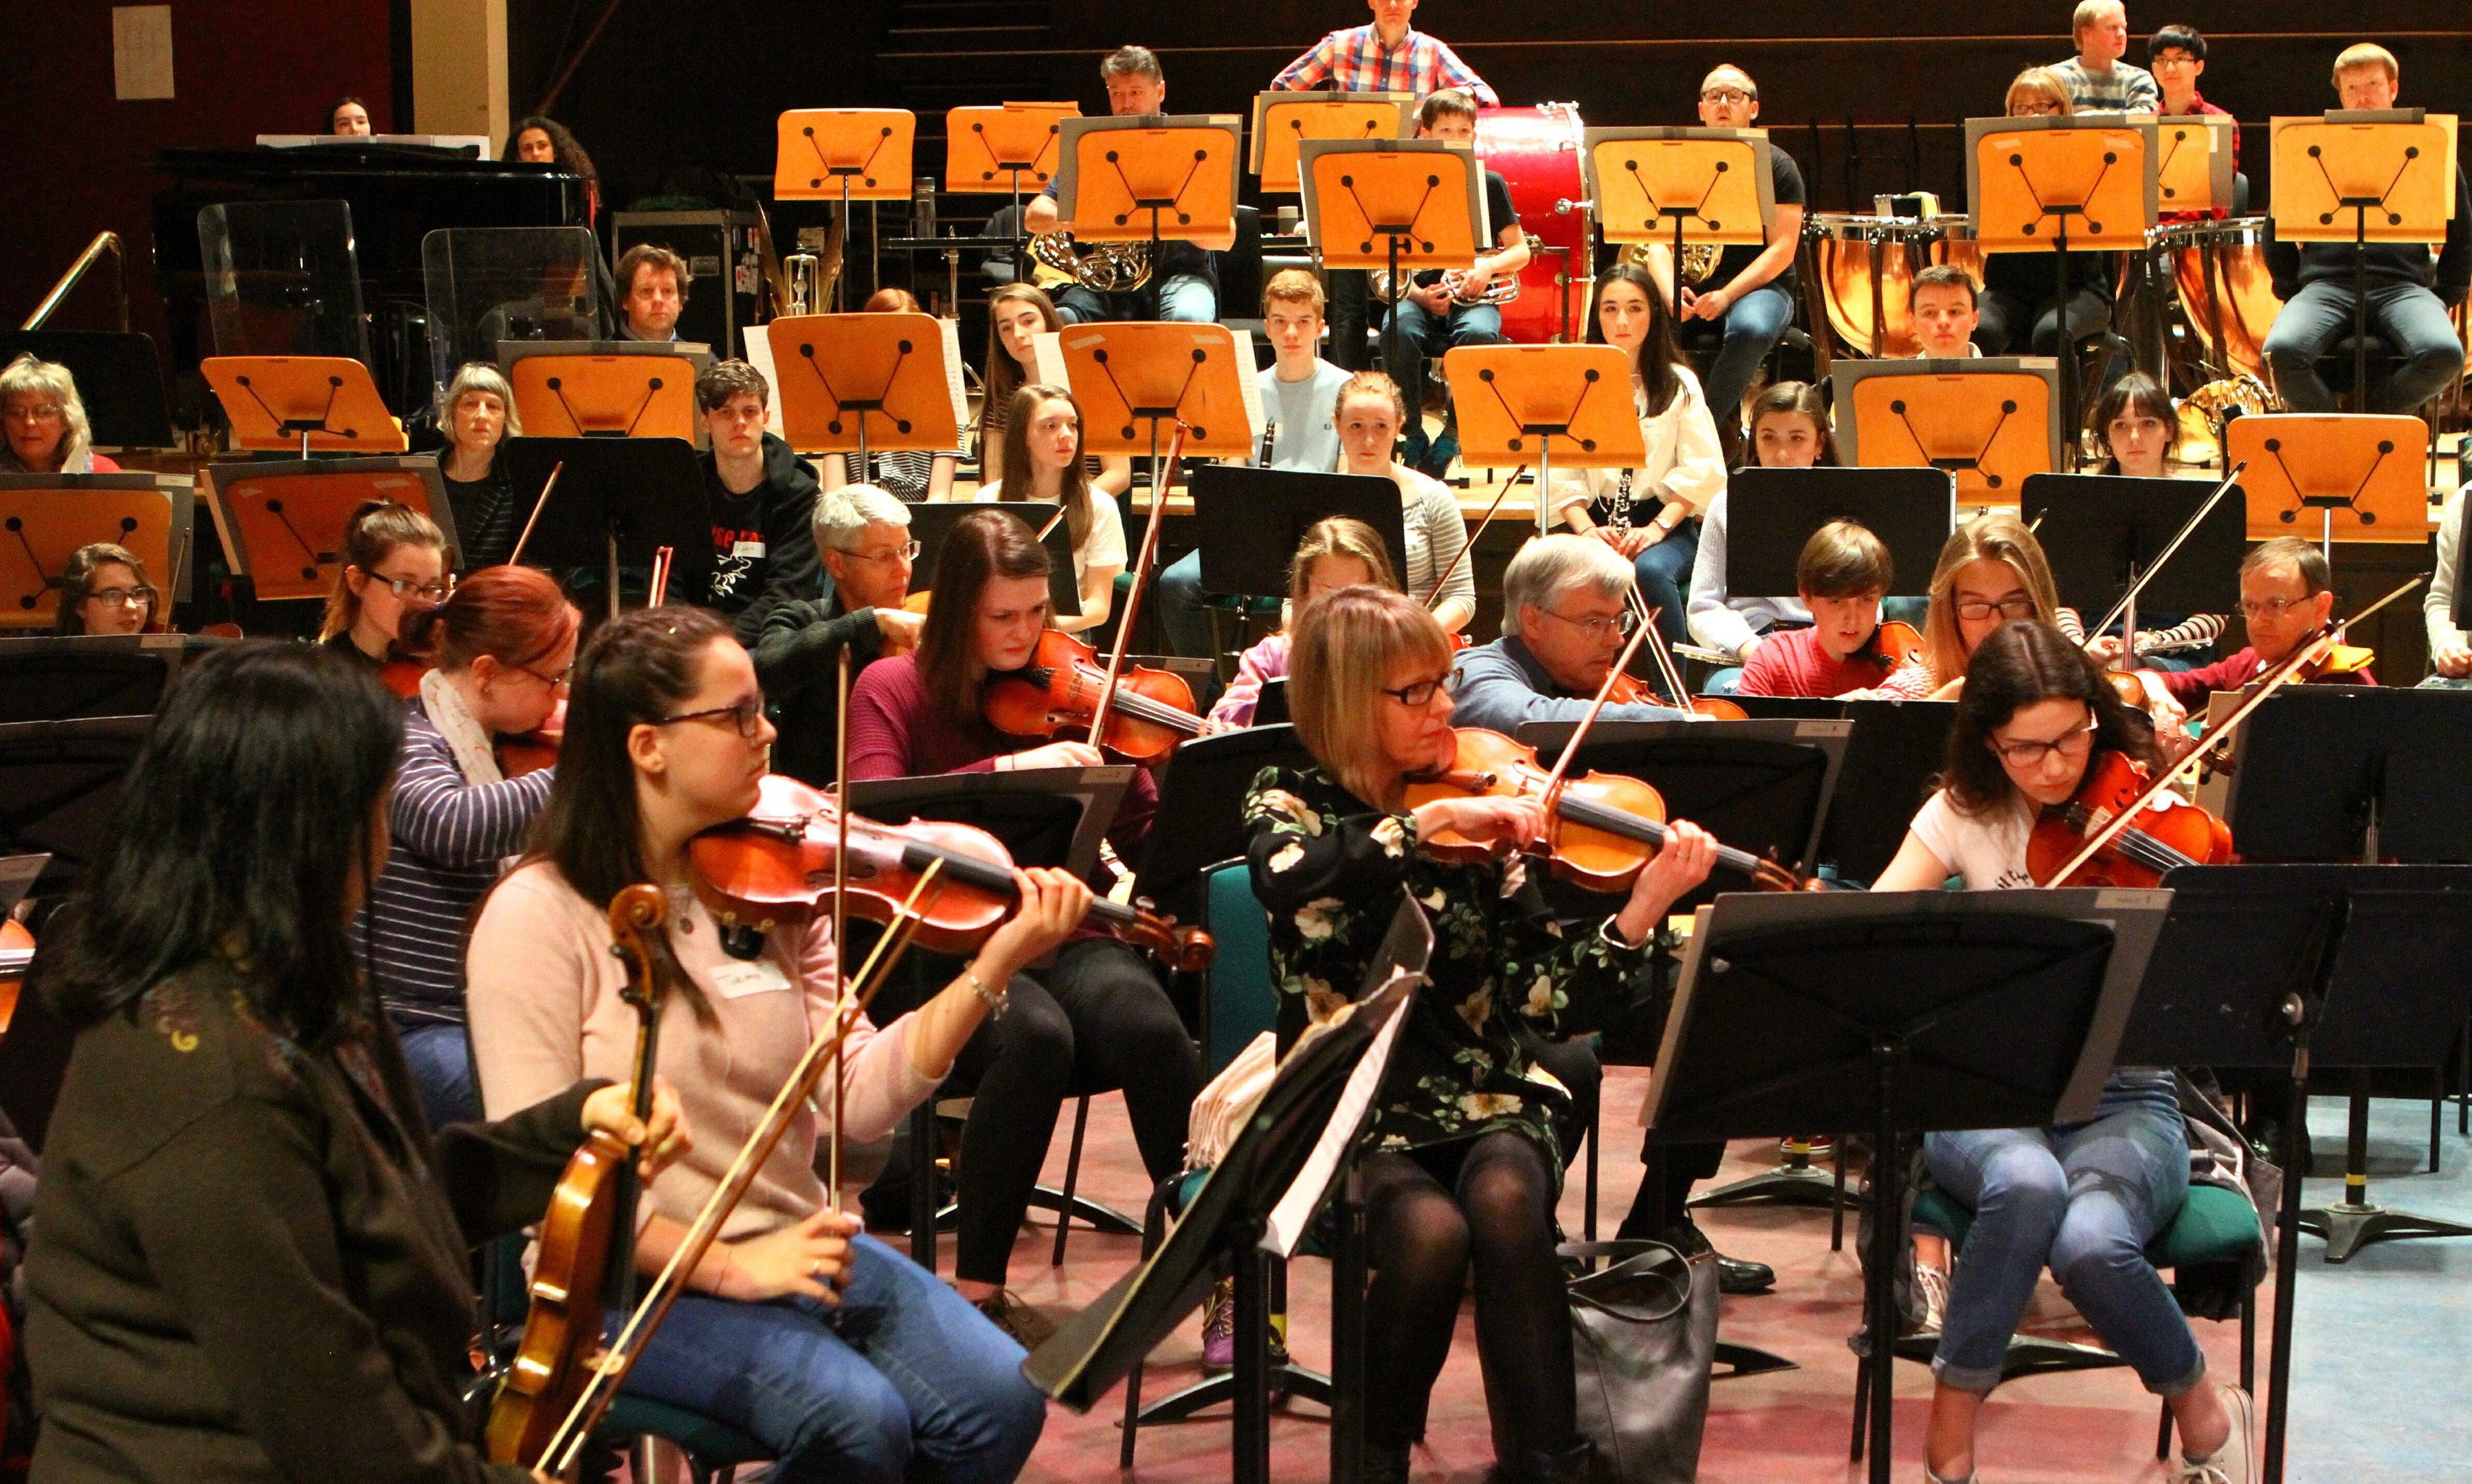 Some of the Dundee schoolchildren rehearsing with the RSNO at the Caird Hall in Dundee